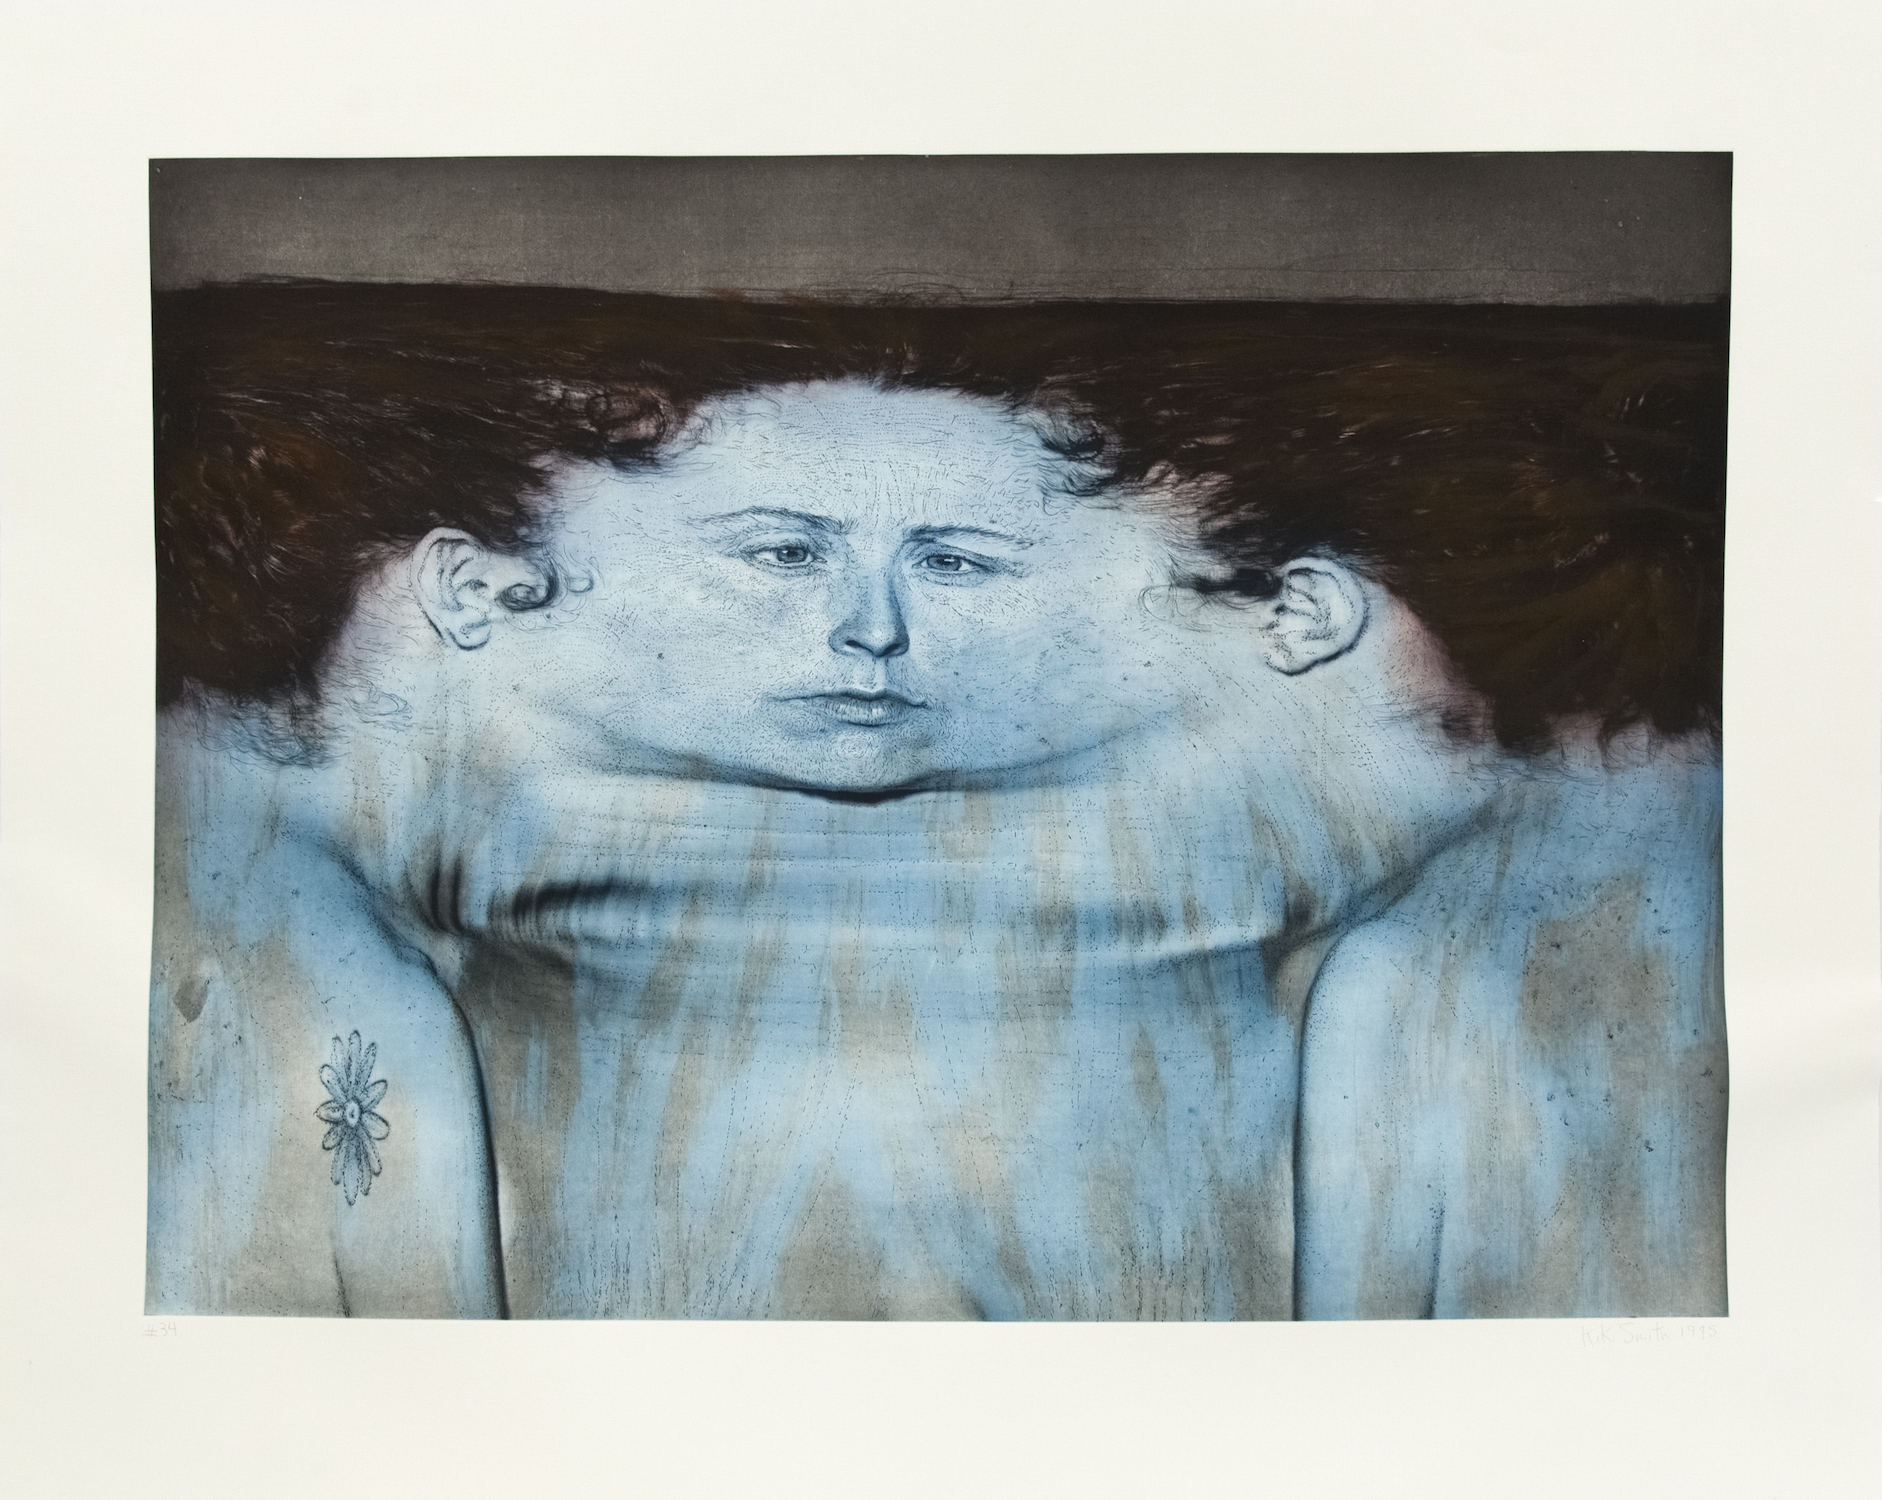 My Blue Lake, 1995, Photogravure and lithograph, 43 3/4 x 54 3/4 in (111.1 x 139.1 cm), Edition of 41